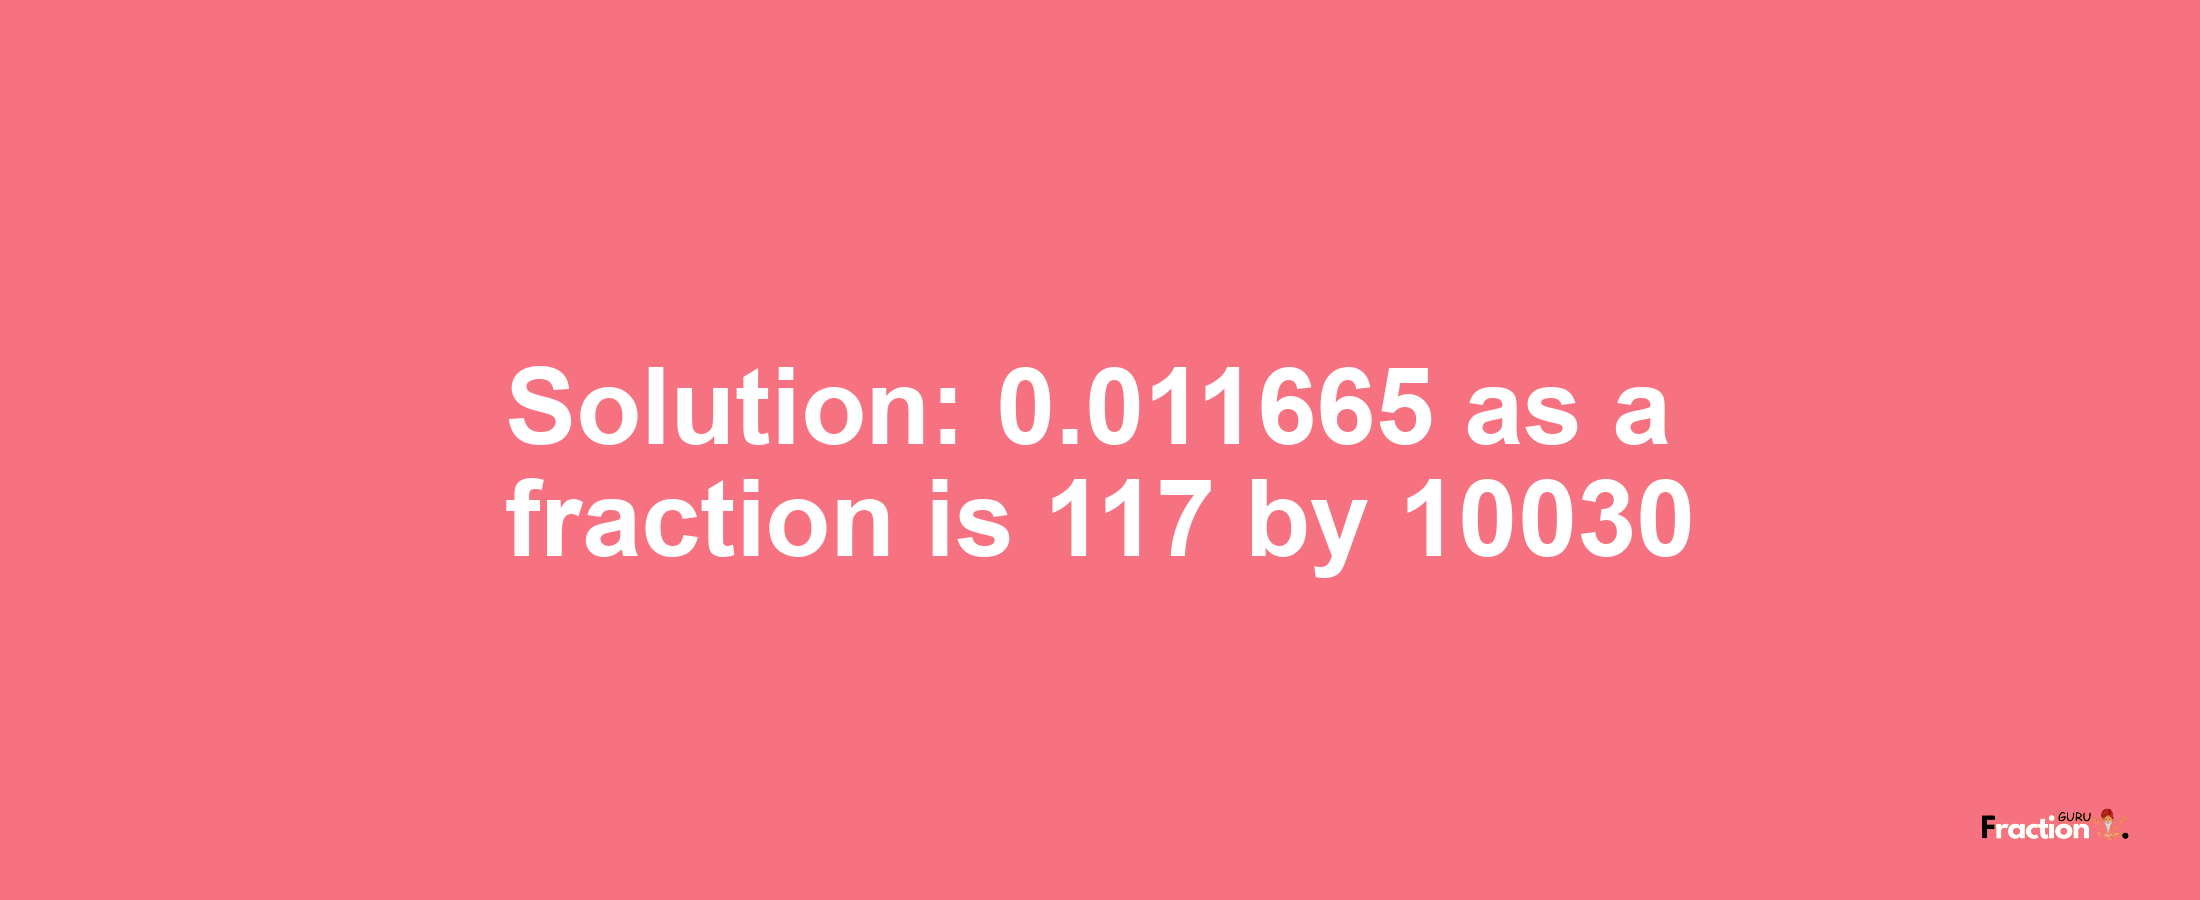 Solution:0.011665 as a fraction is 117/10030